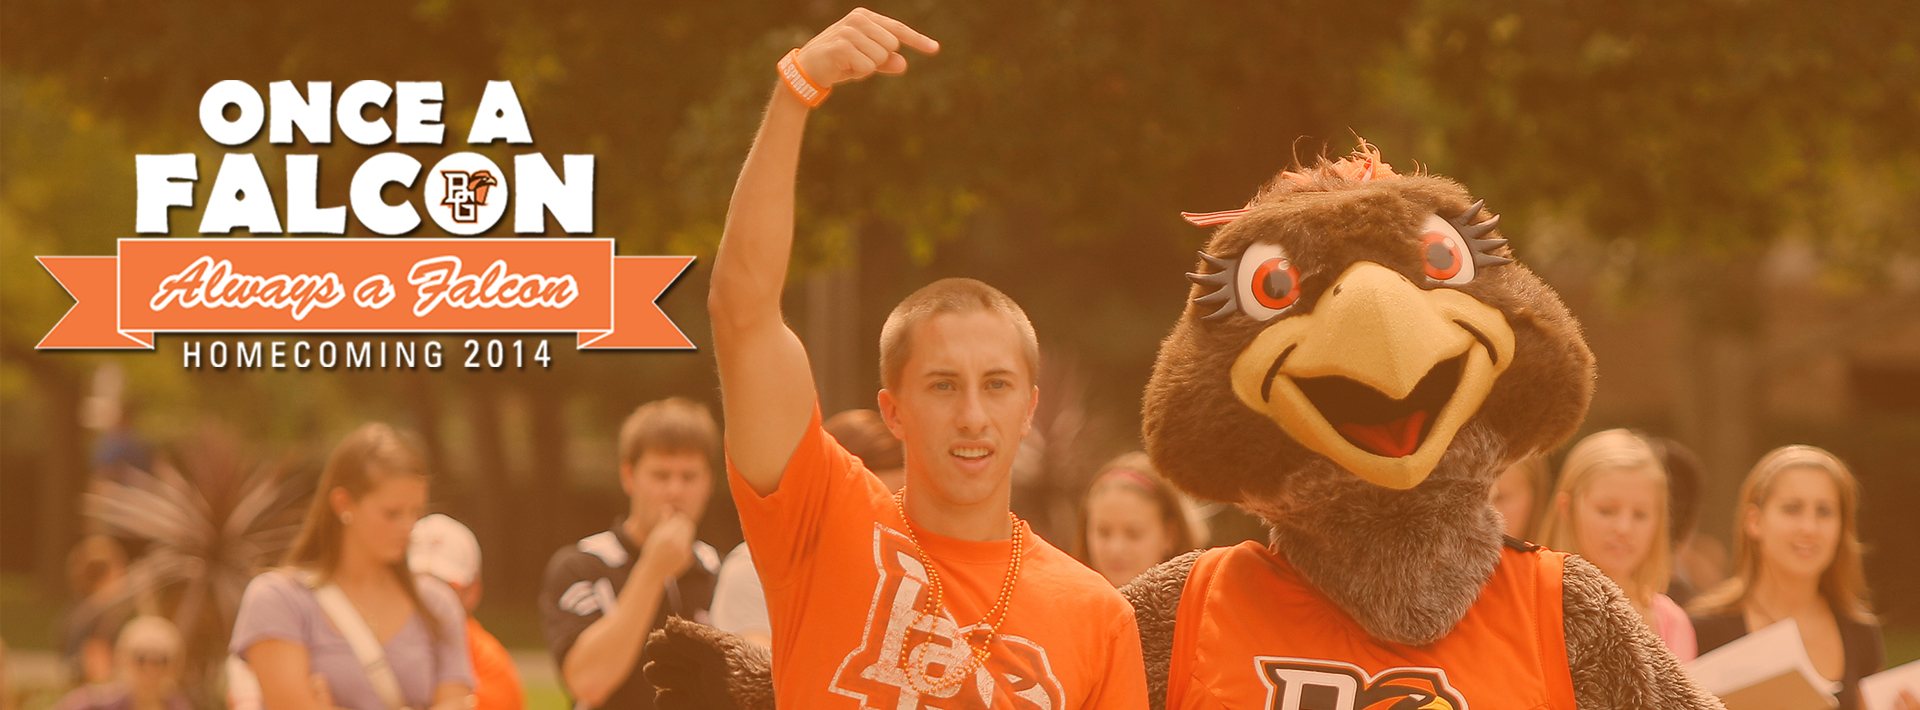 HOMECOMING 2014 – SHARE YOUR FALCON PRIDE!